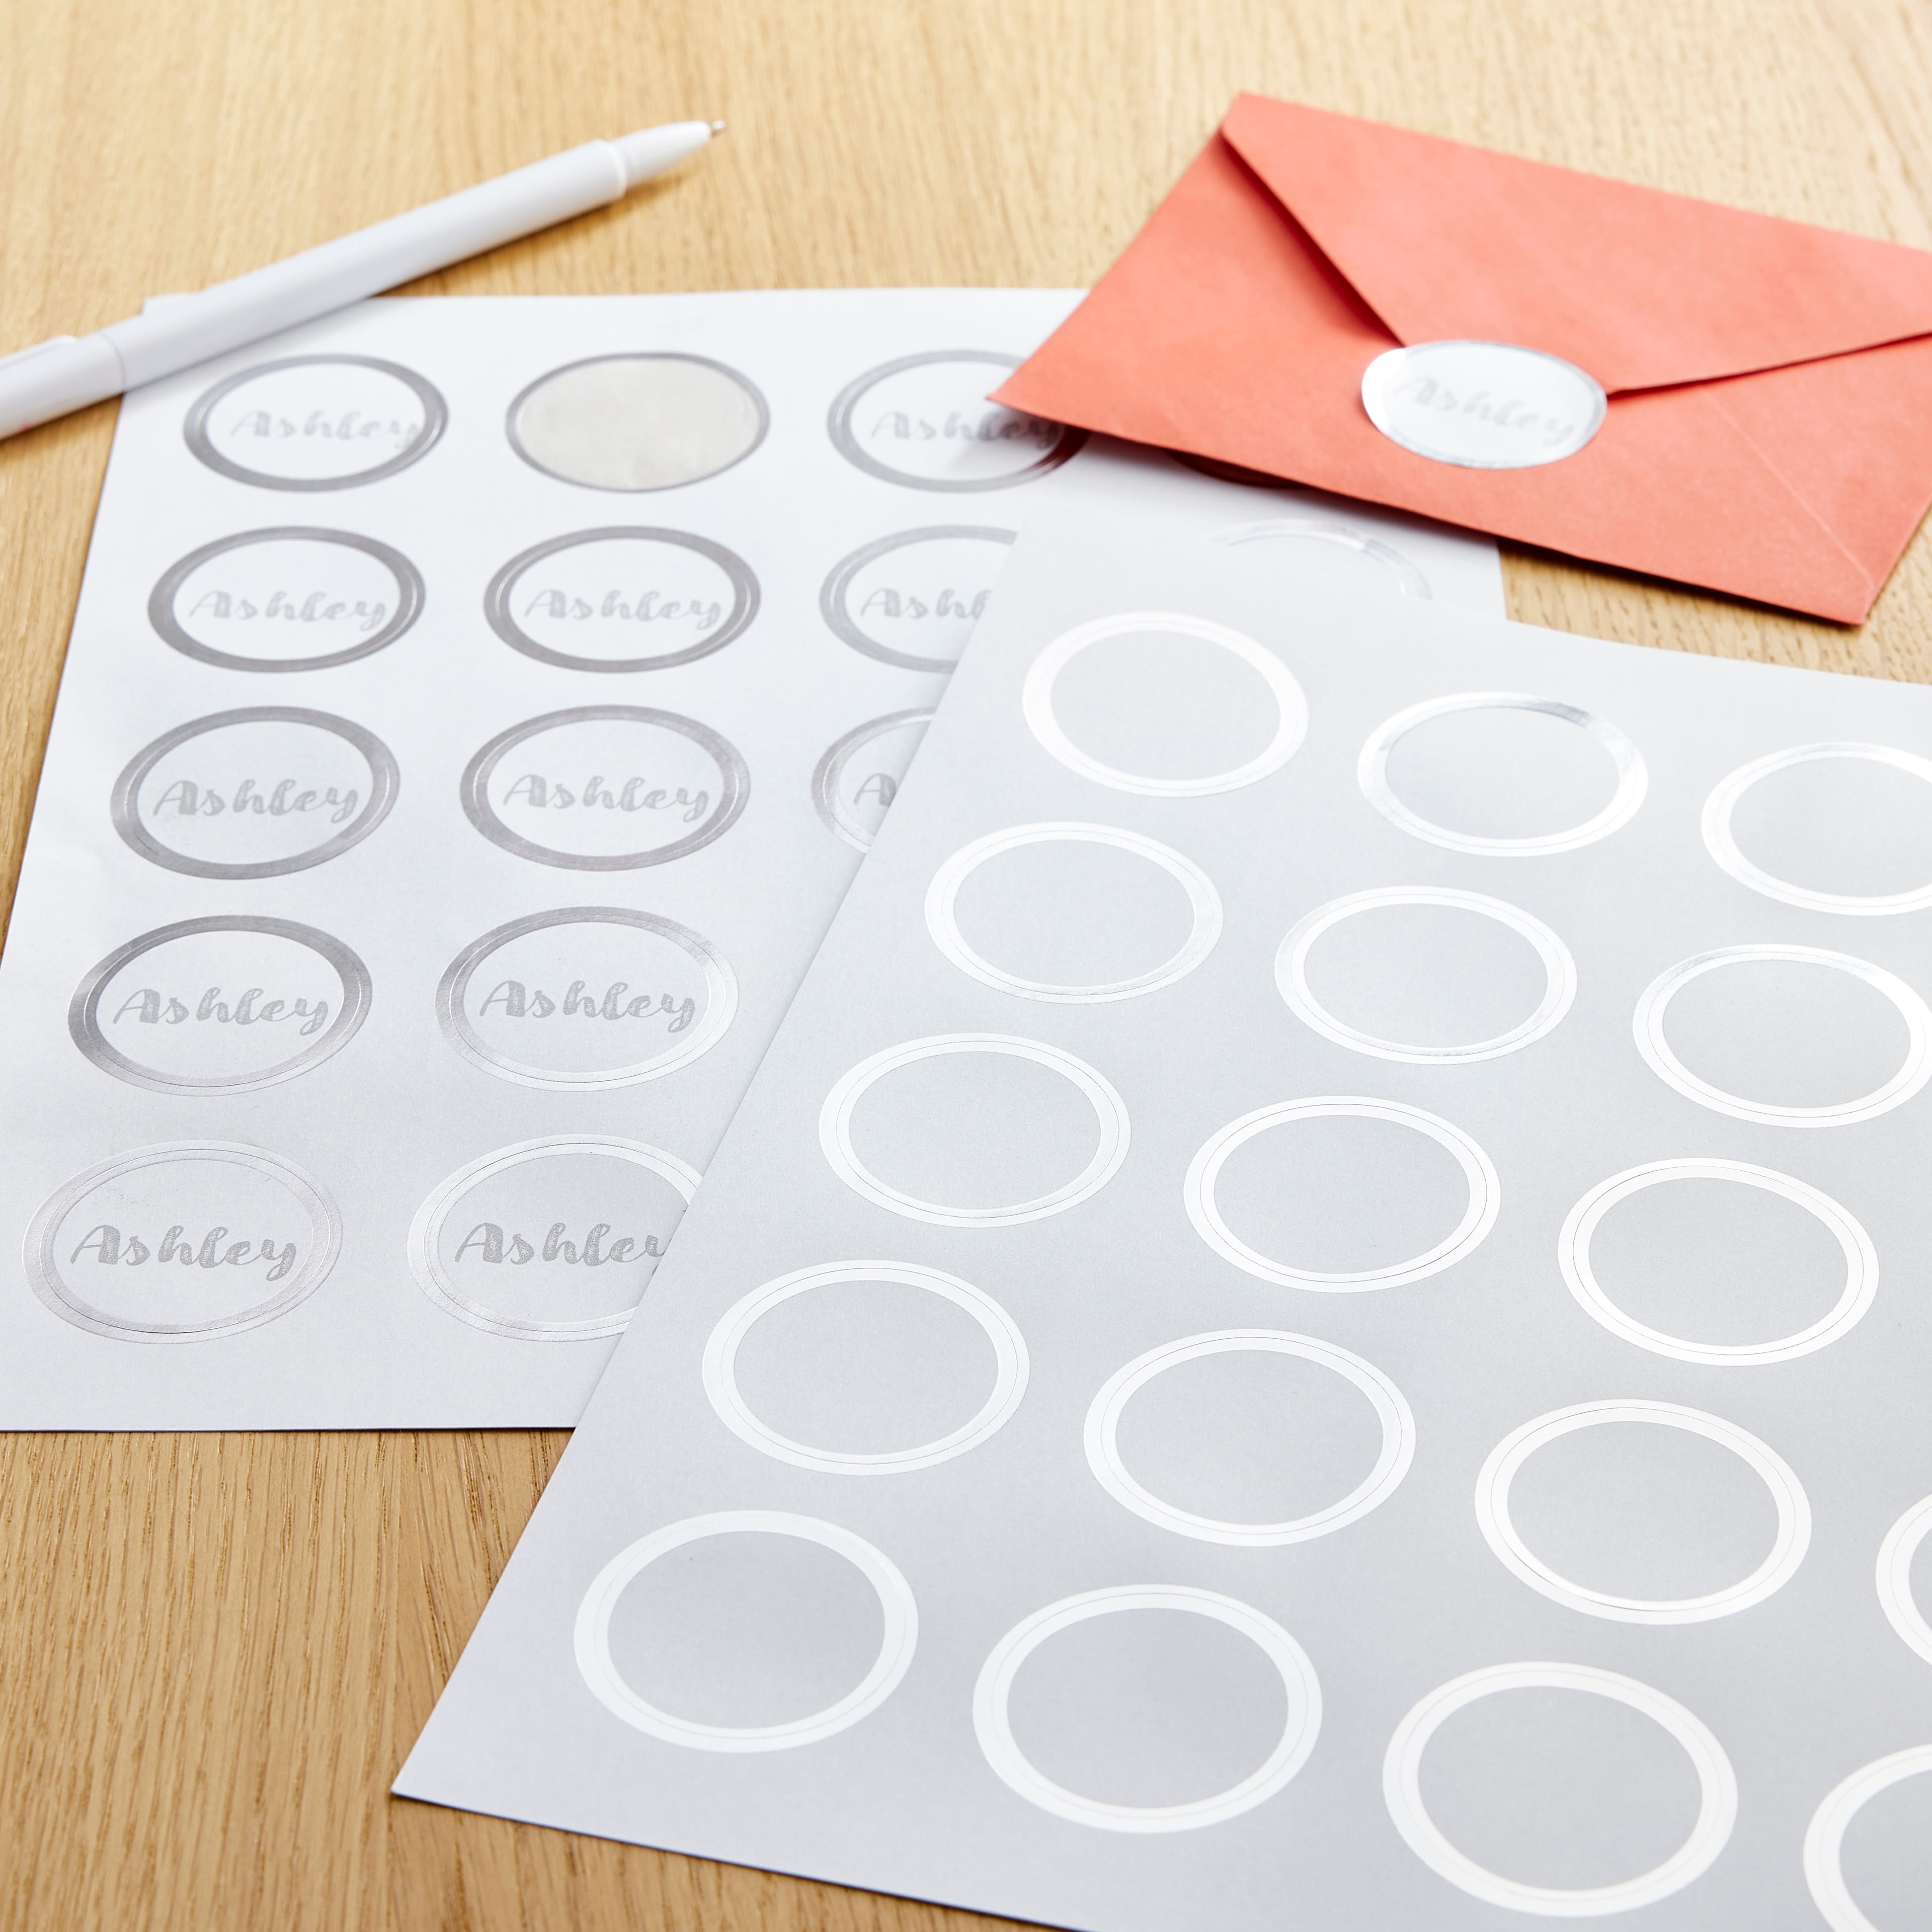 Recollection Label Stickers Template